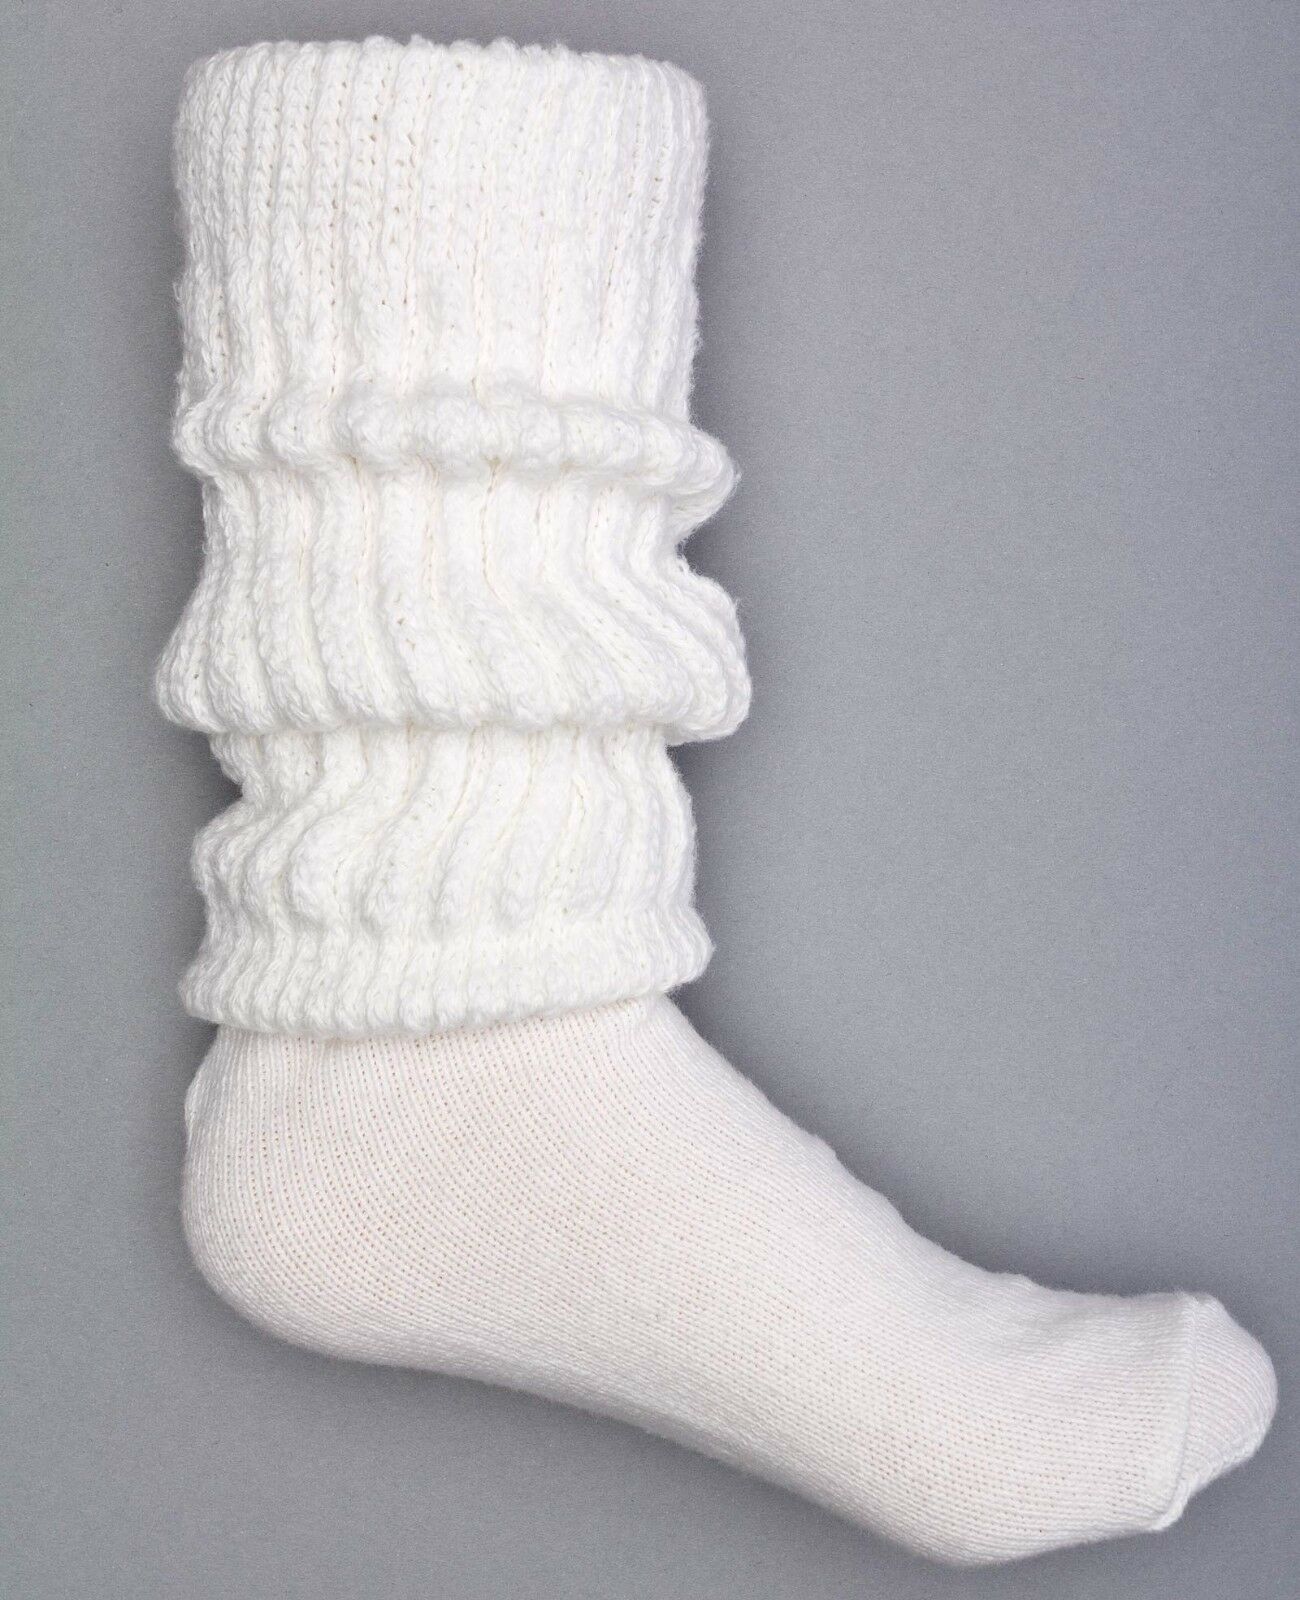 6 Pairs Women's Knee High White Soft Slouch Socks Made In Usa